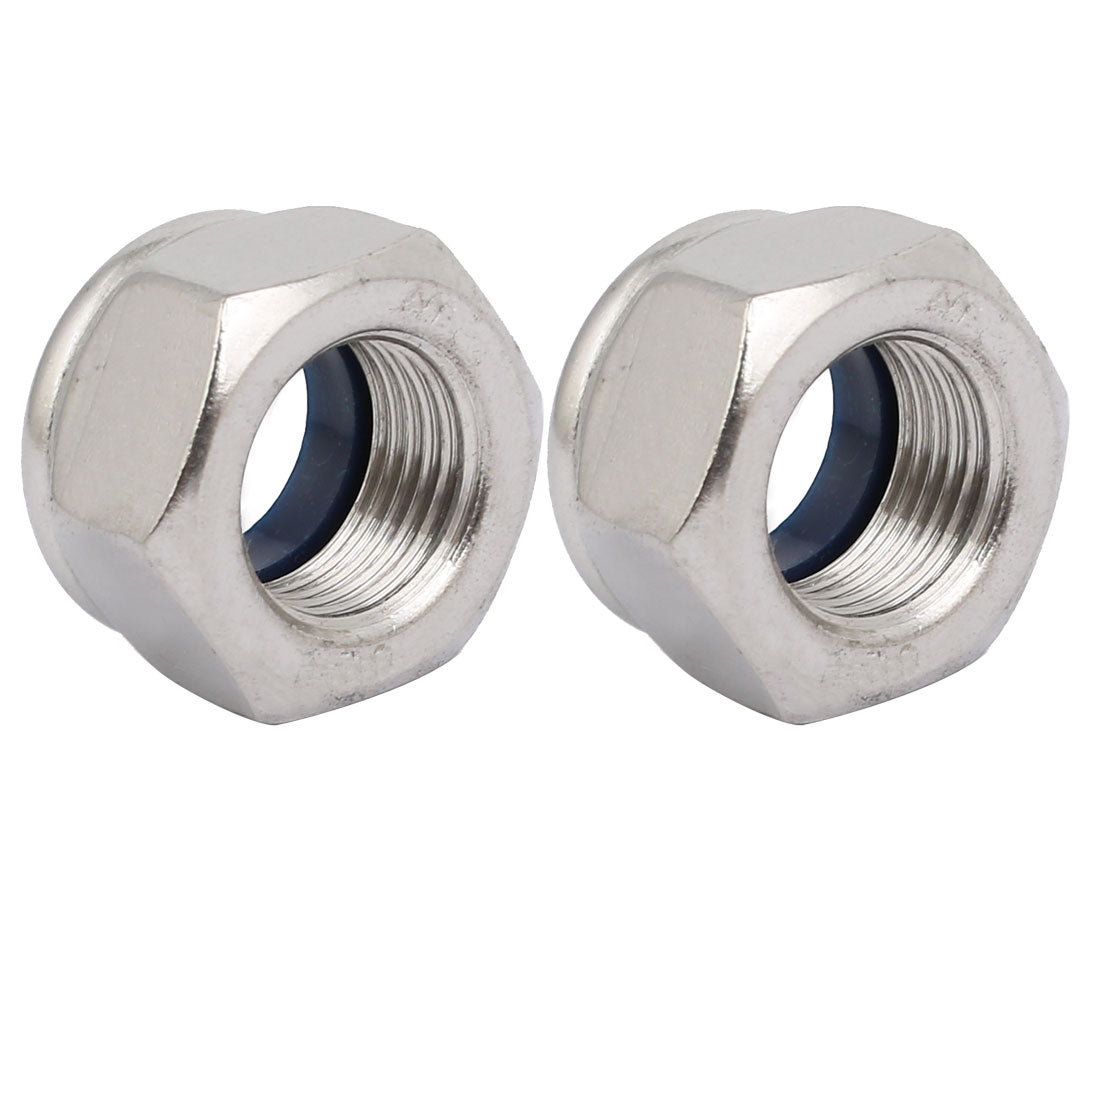 uxcell Uxcell 2pcs M16 x 1.5mm Pitch Metric Fine Thread 304 Stainless Steel Hex Lock Nuts